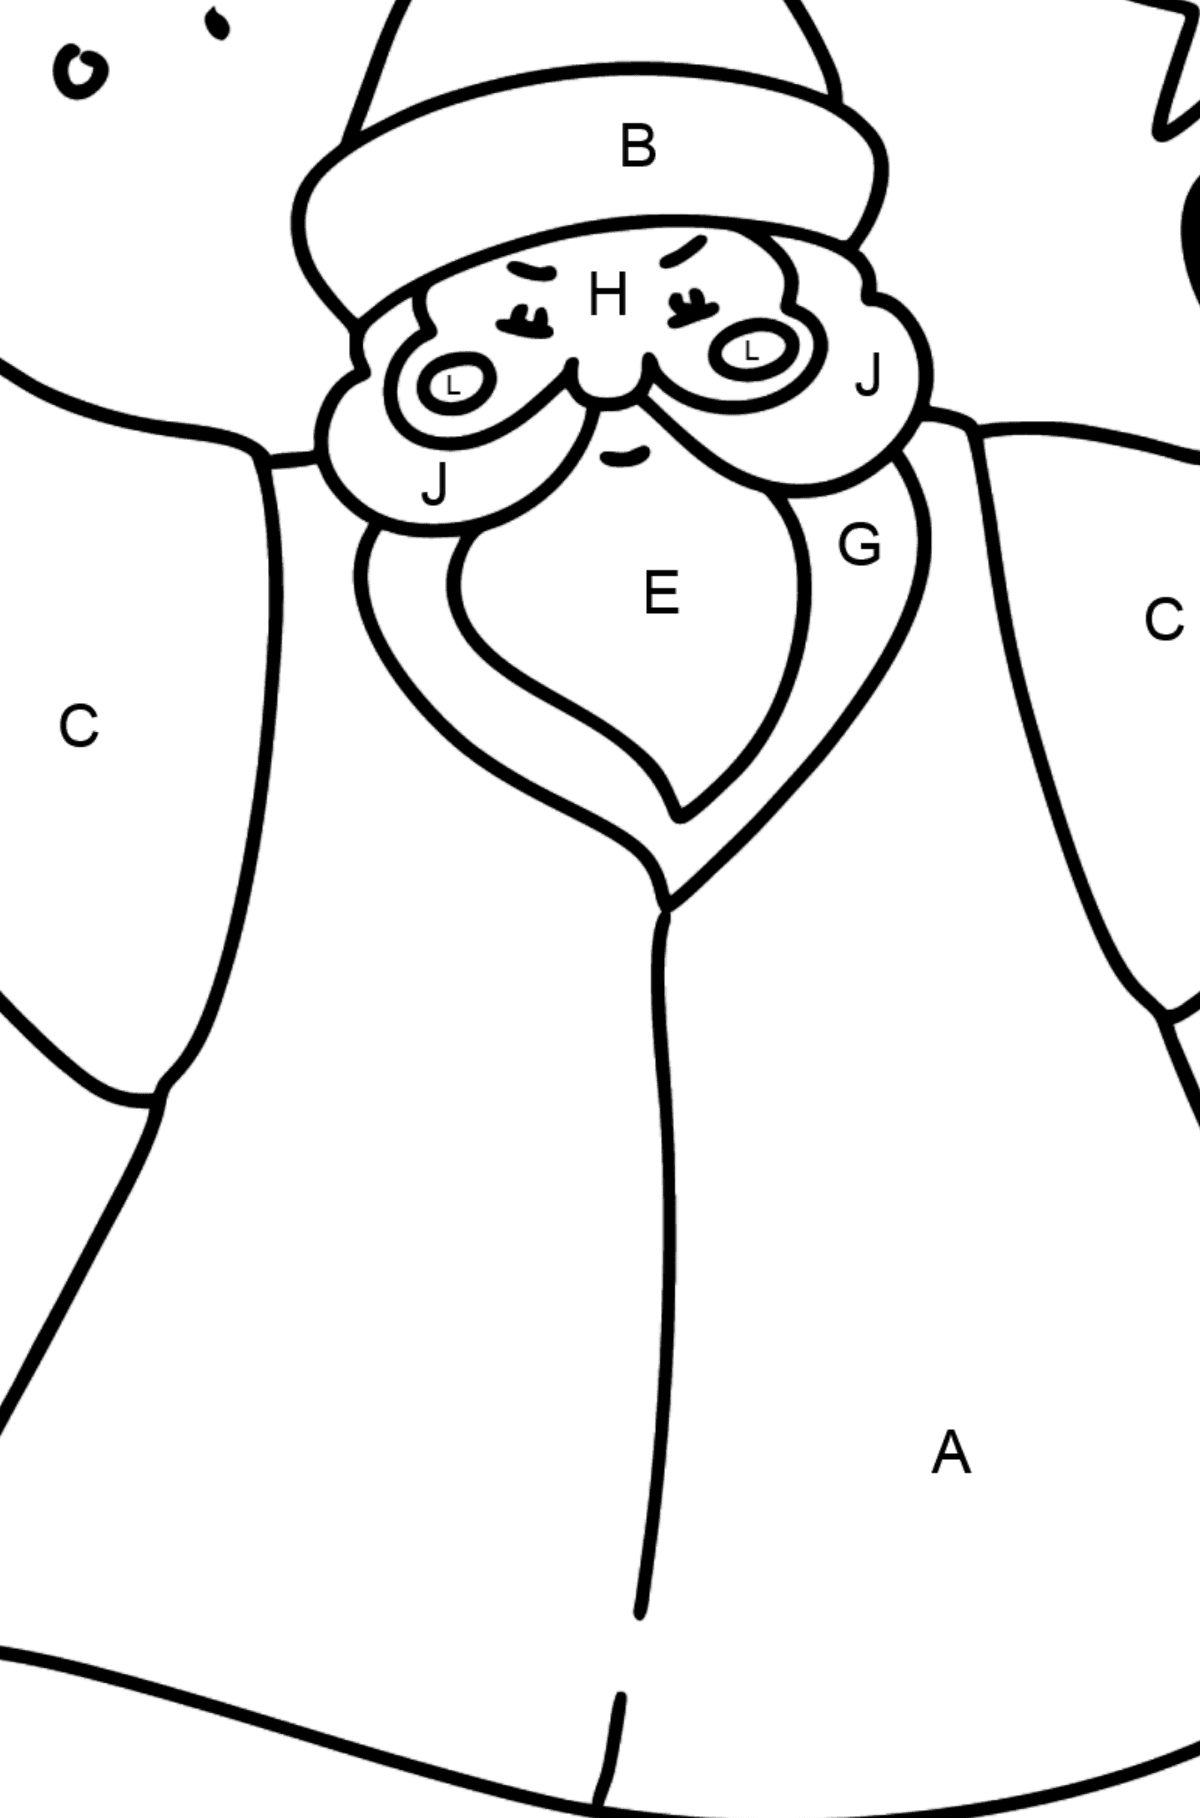 Father Frost coloring page - Coloring by Letters for Kids